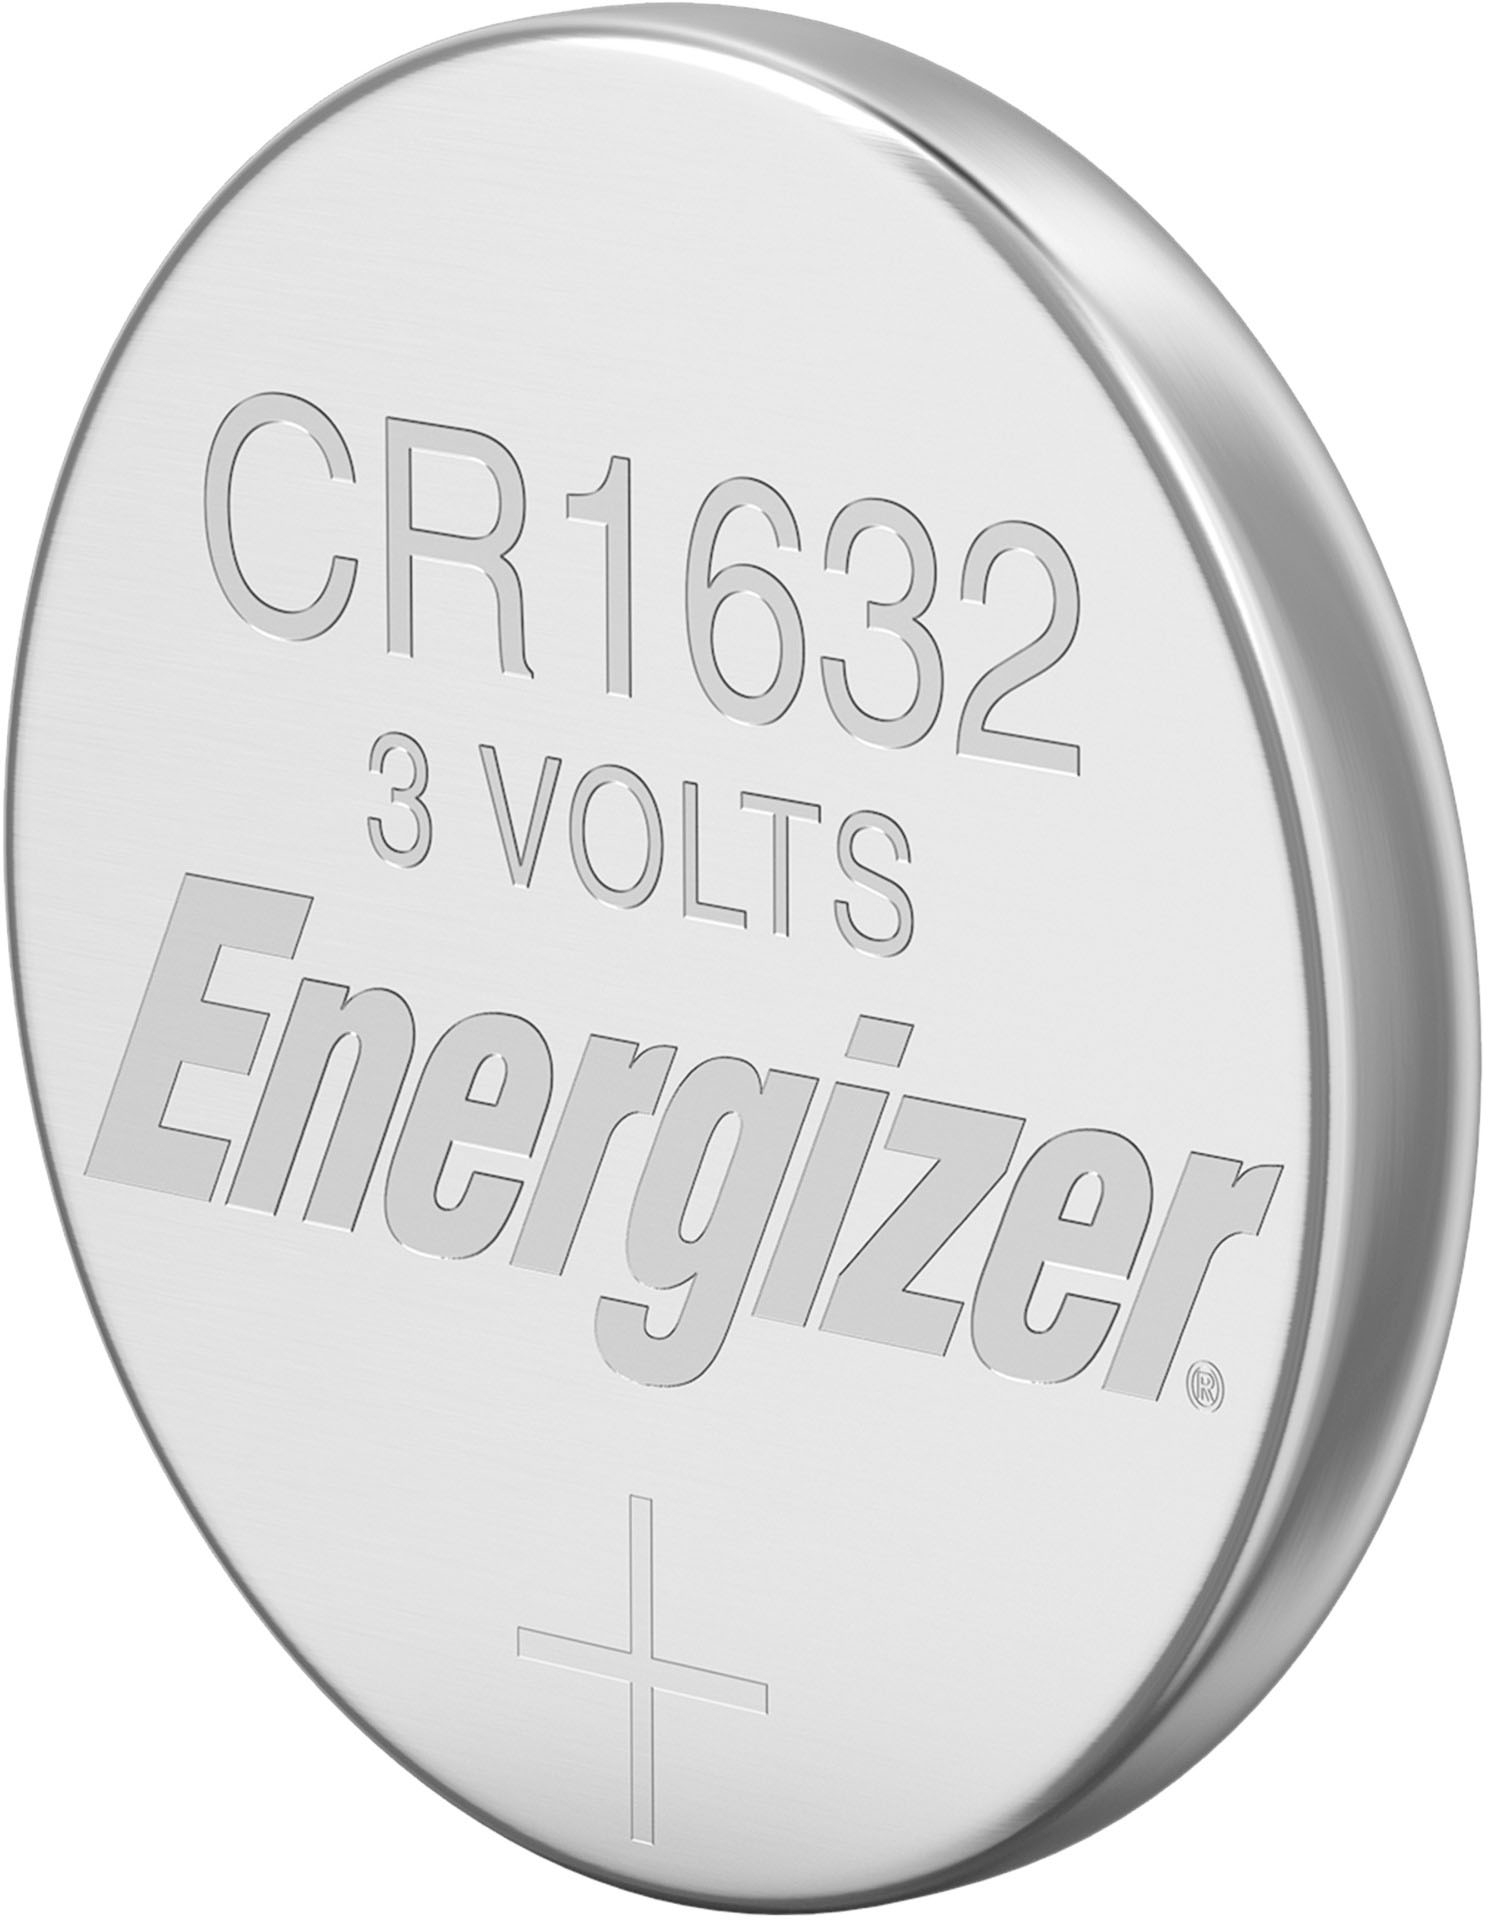 Lithium Coin Battery Cr1632 3.0 Volts, Batteries